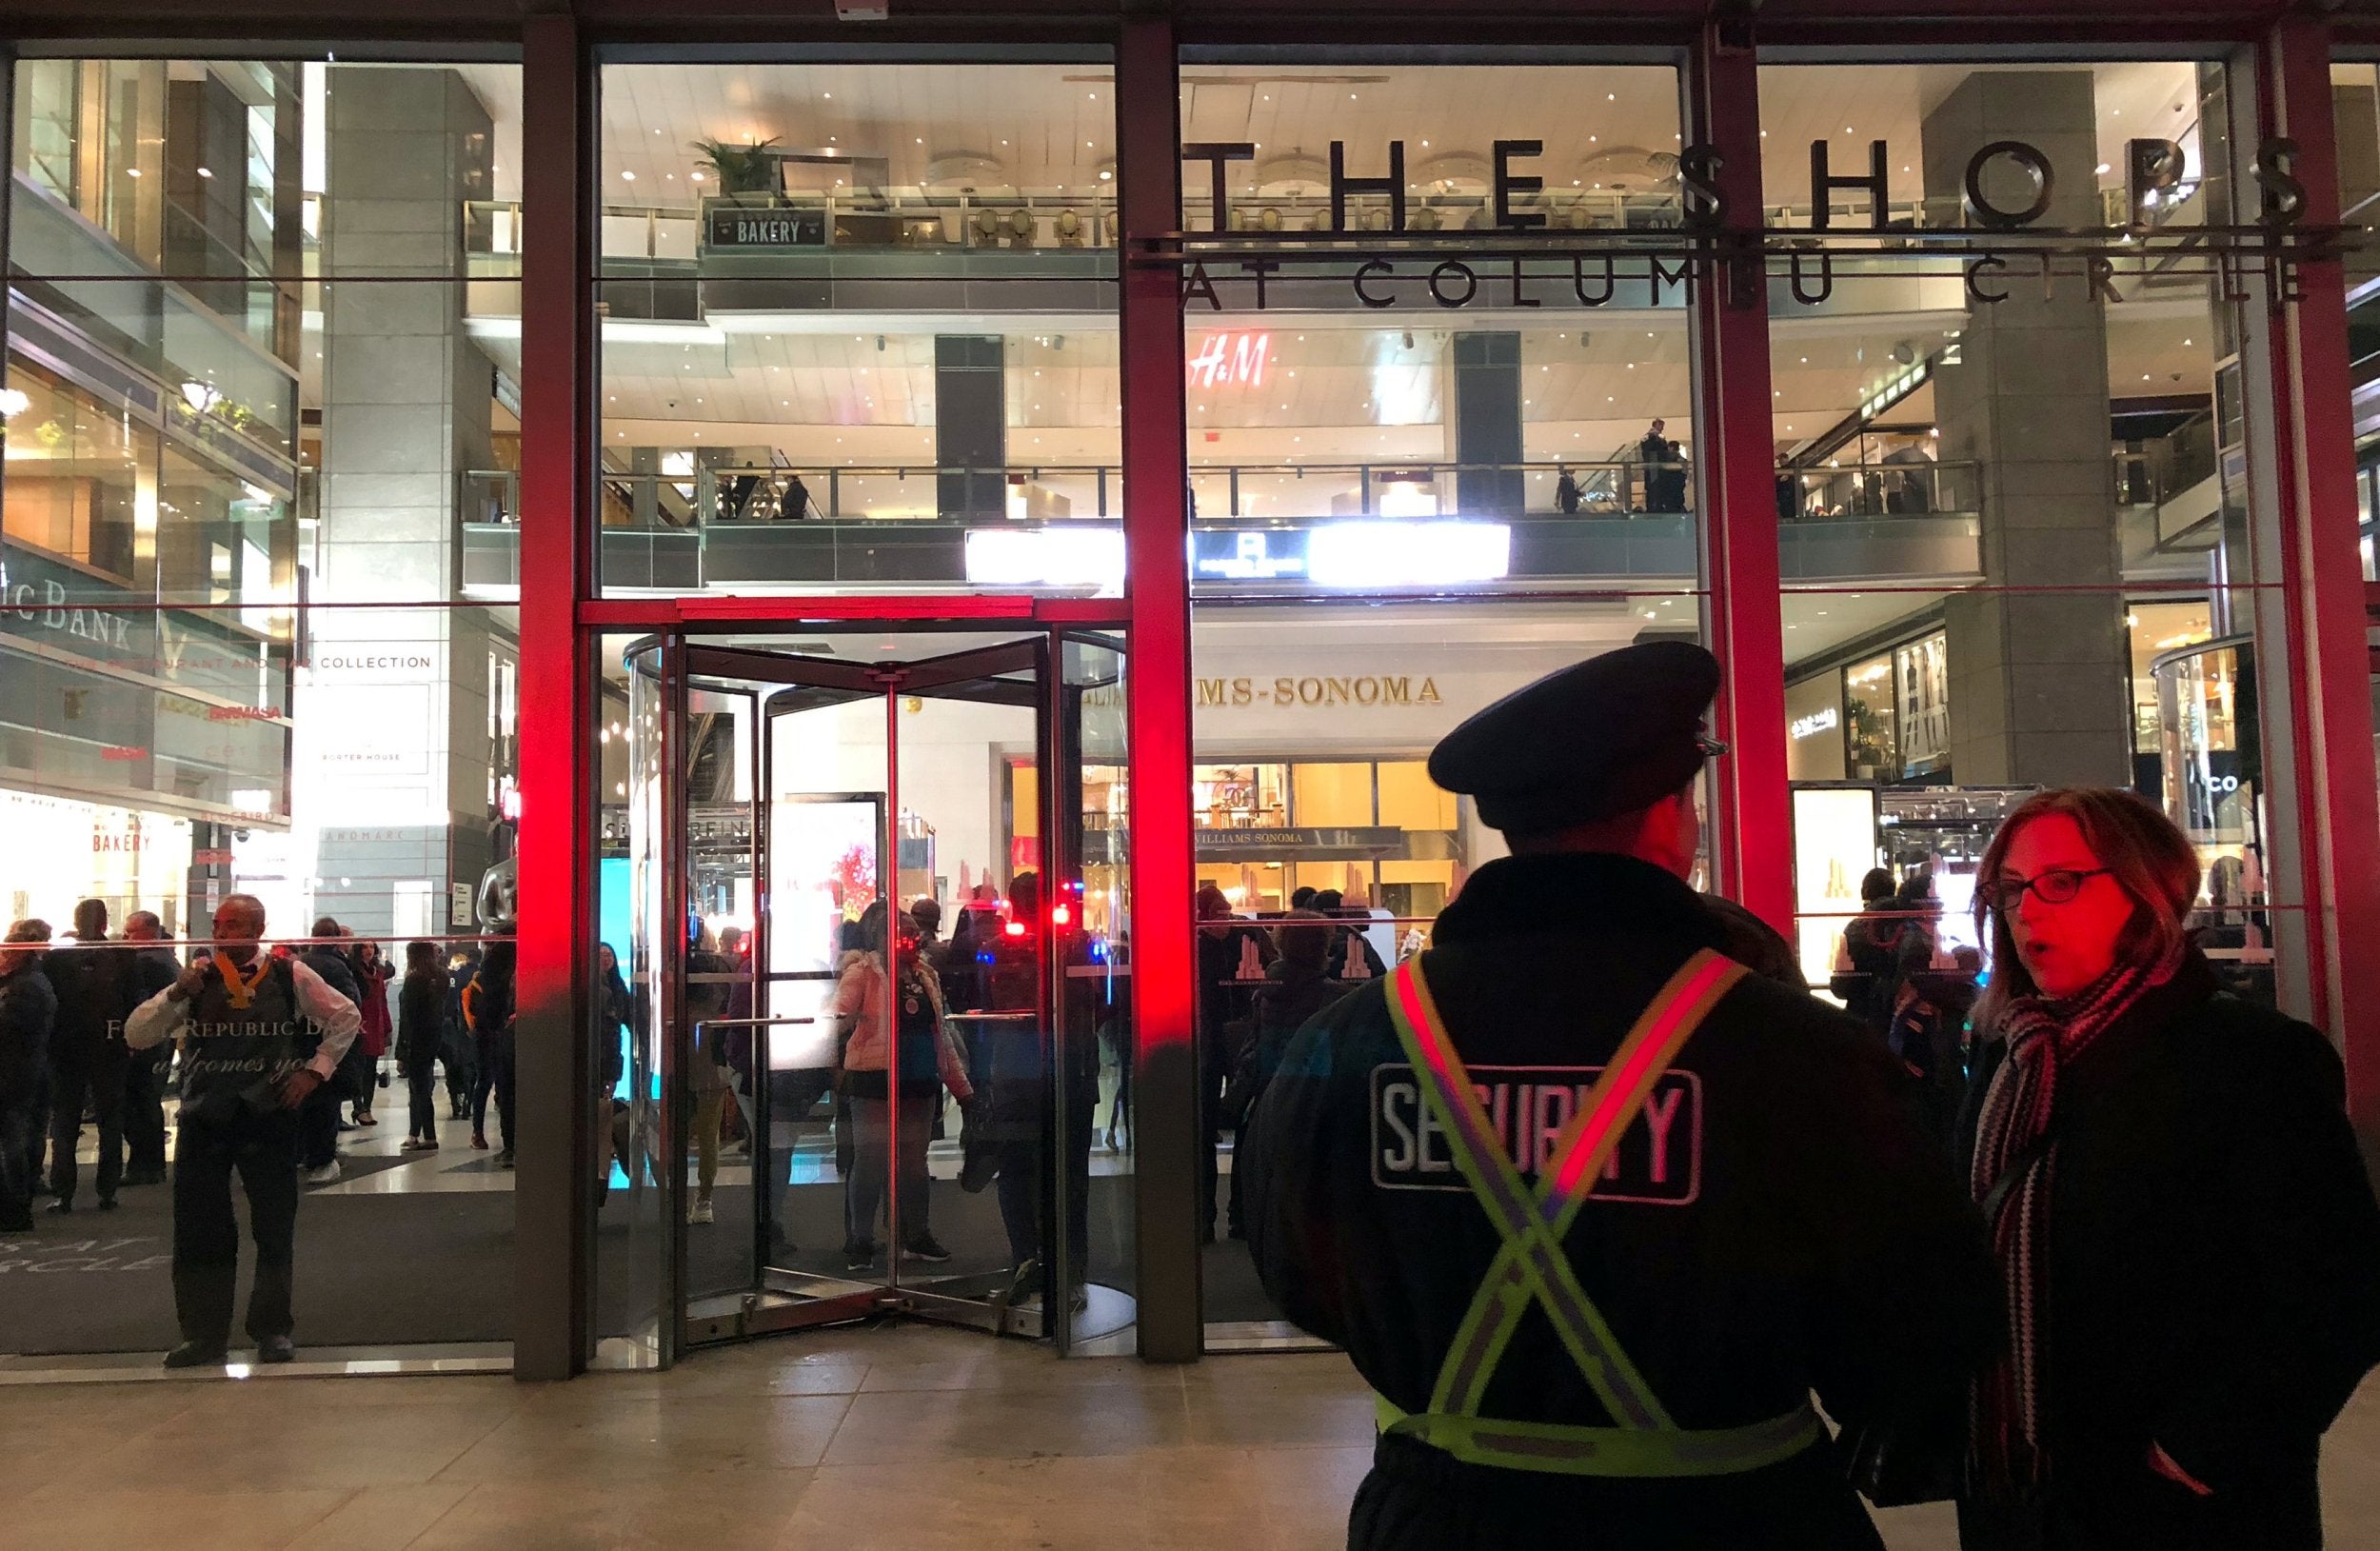 Crowds begin to evacuate from the Time Warner Center in New York amid reports of two suspicious packages